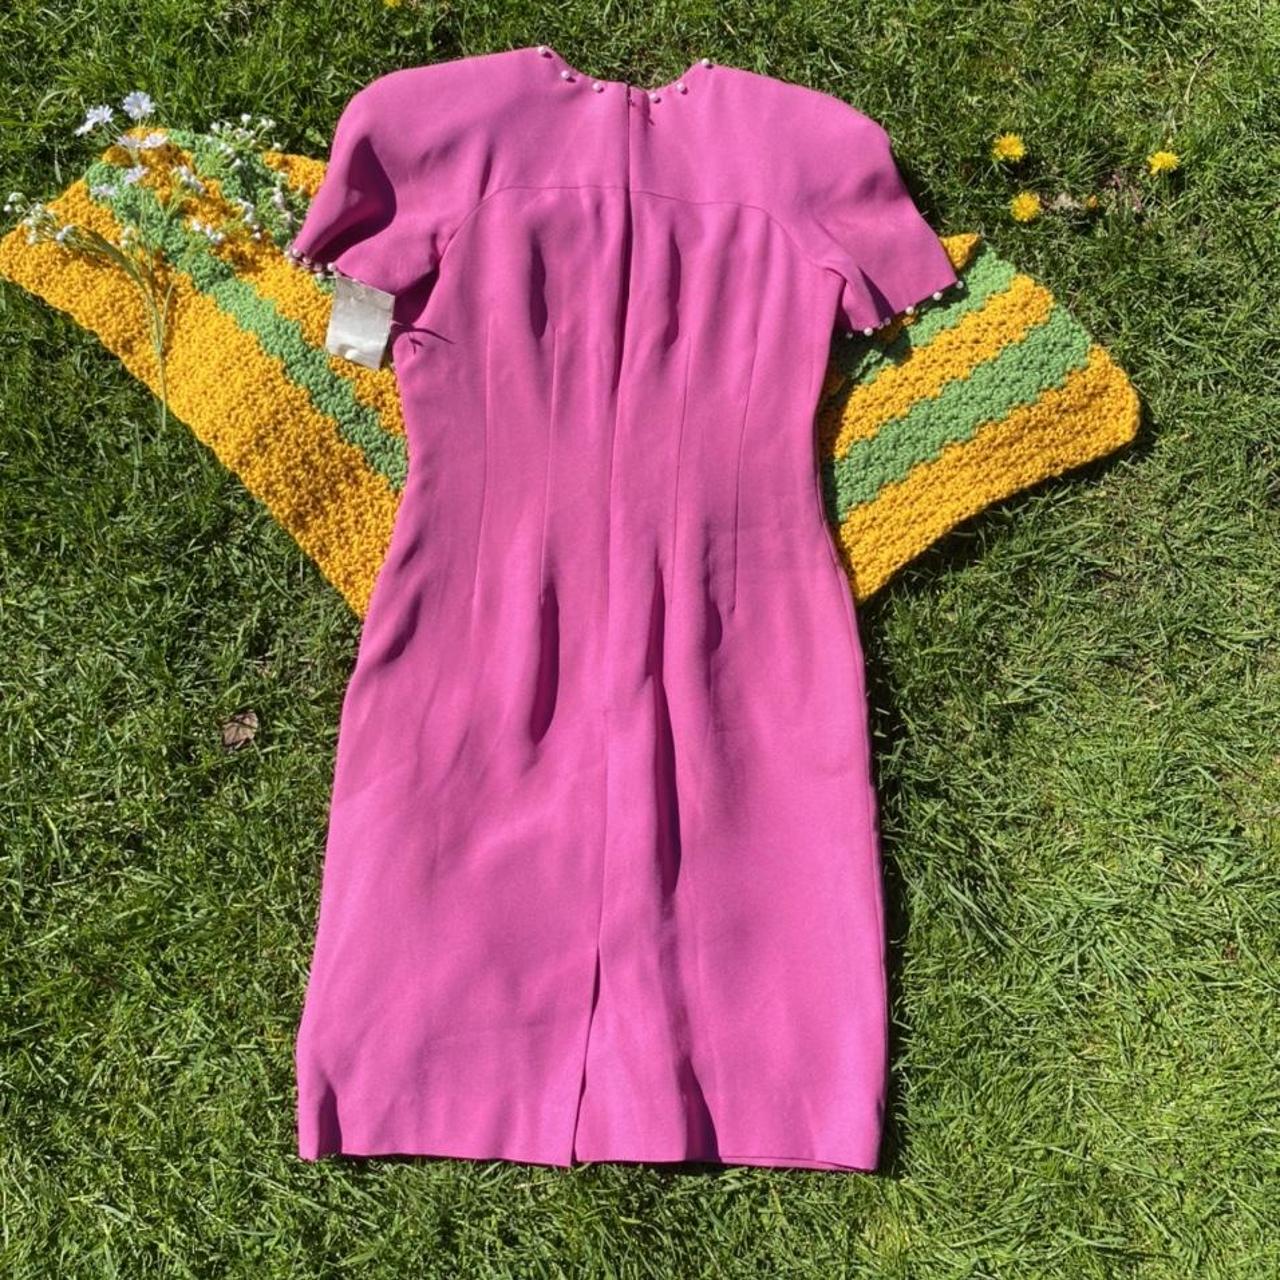 Product Image 2 - Vintage hot pink pencil dress

This